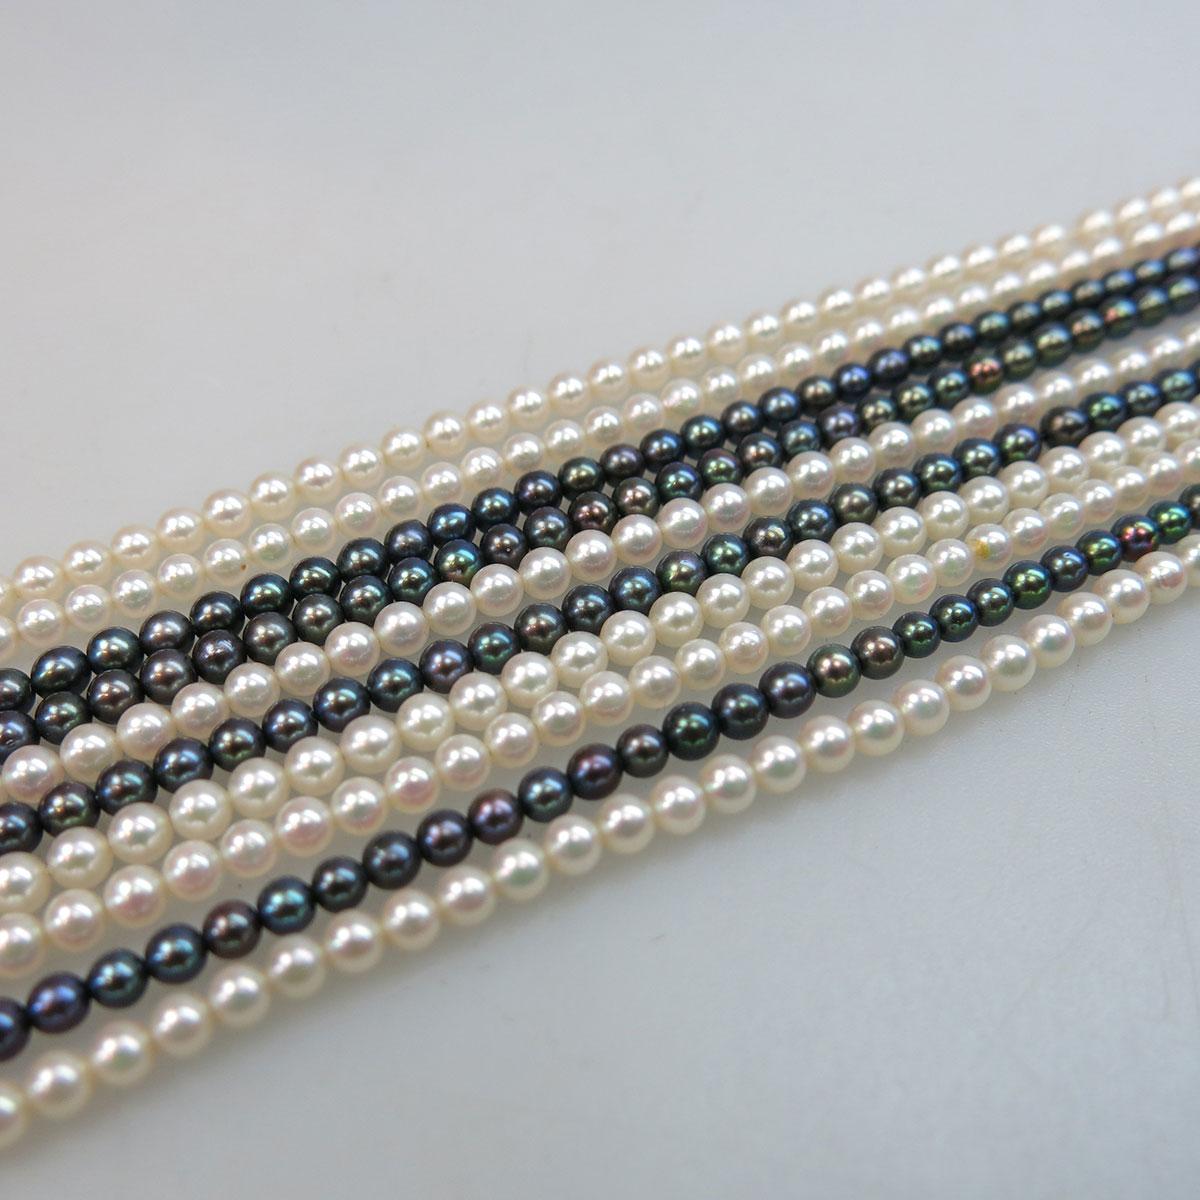 5 Endless Strands Of White And Grey Cultured Pearls